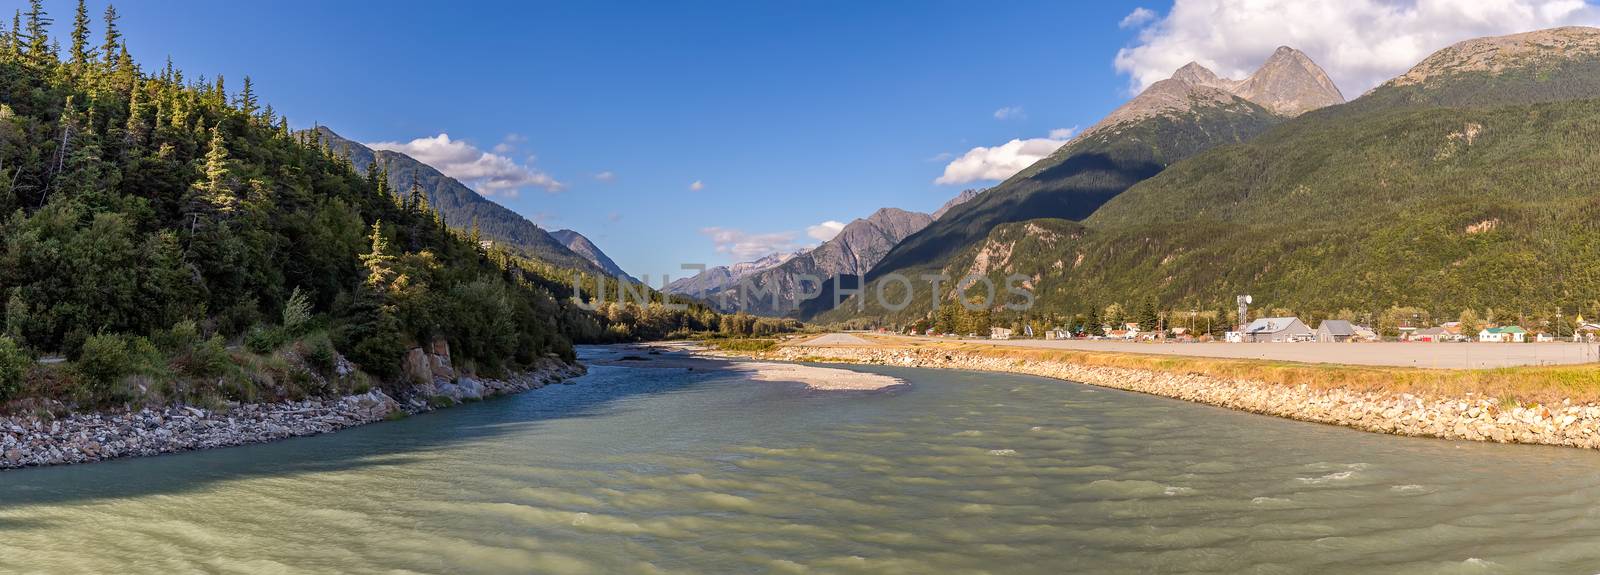 View of Skagway River and Skagway airport at sunset in Alaska. Golden hour. Blue cloudy sky and mountain peaks in the background.